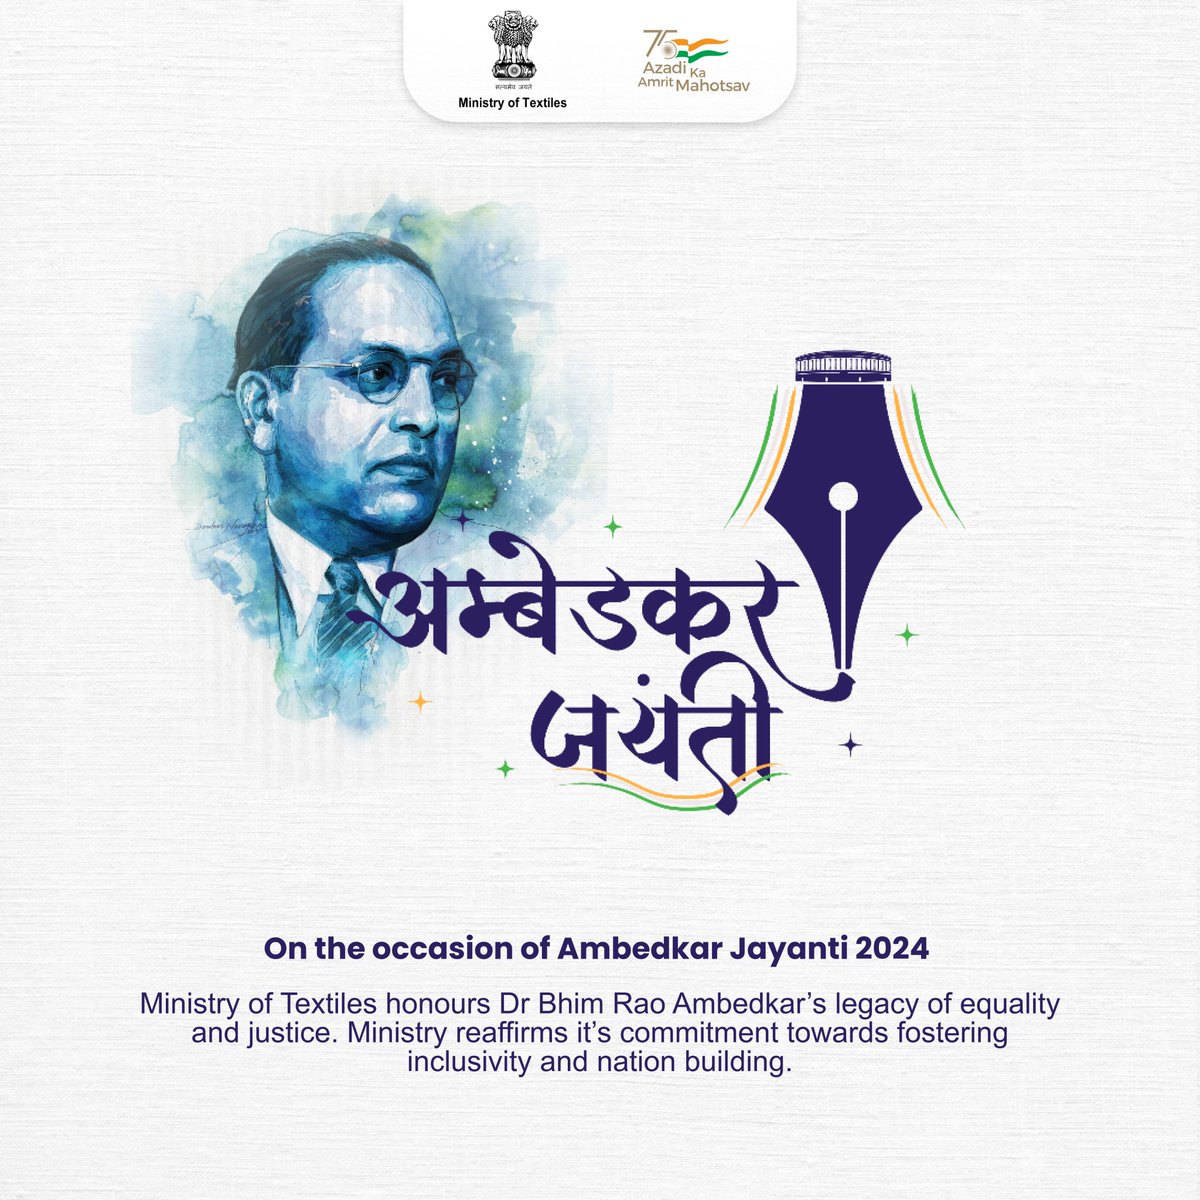 On the occasion of Ambedkar Jayanti 2024, we honour Dr. B.R. Ambedkar's enduring legacy of advocating for equality and justice. #AmbedkarJayanti #MinistryofTextiles